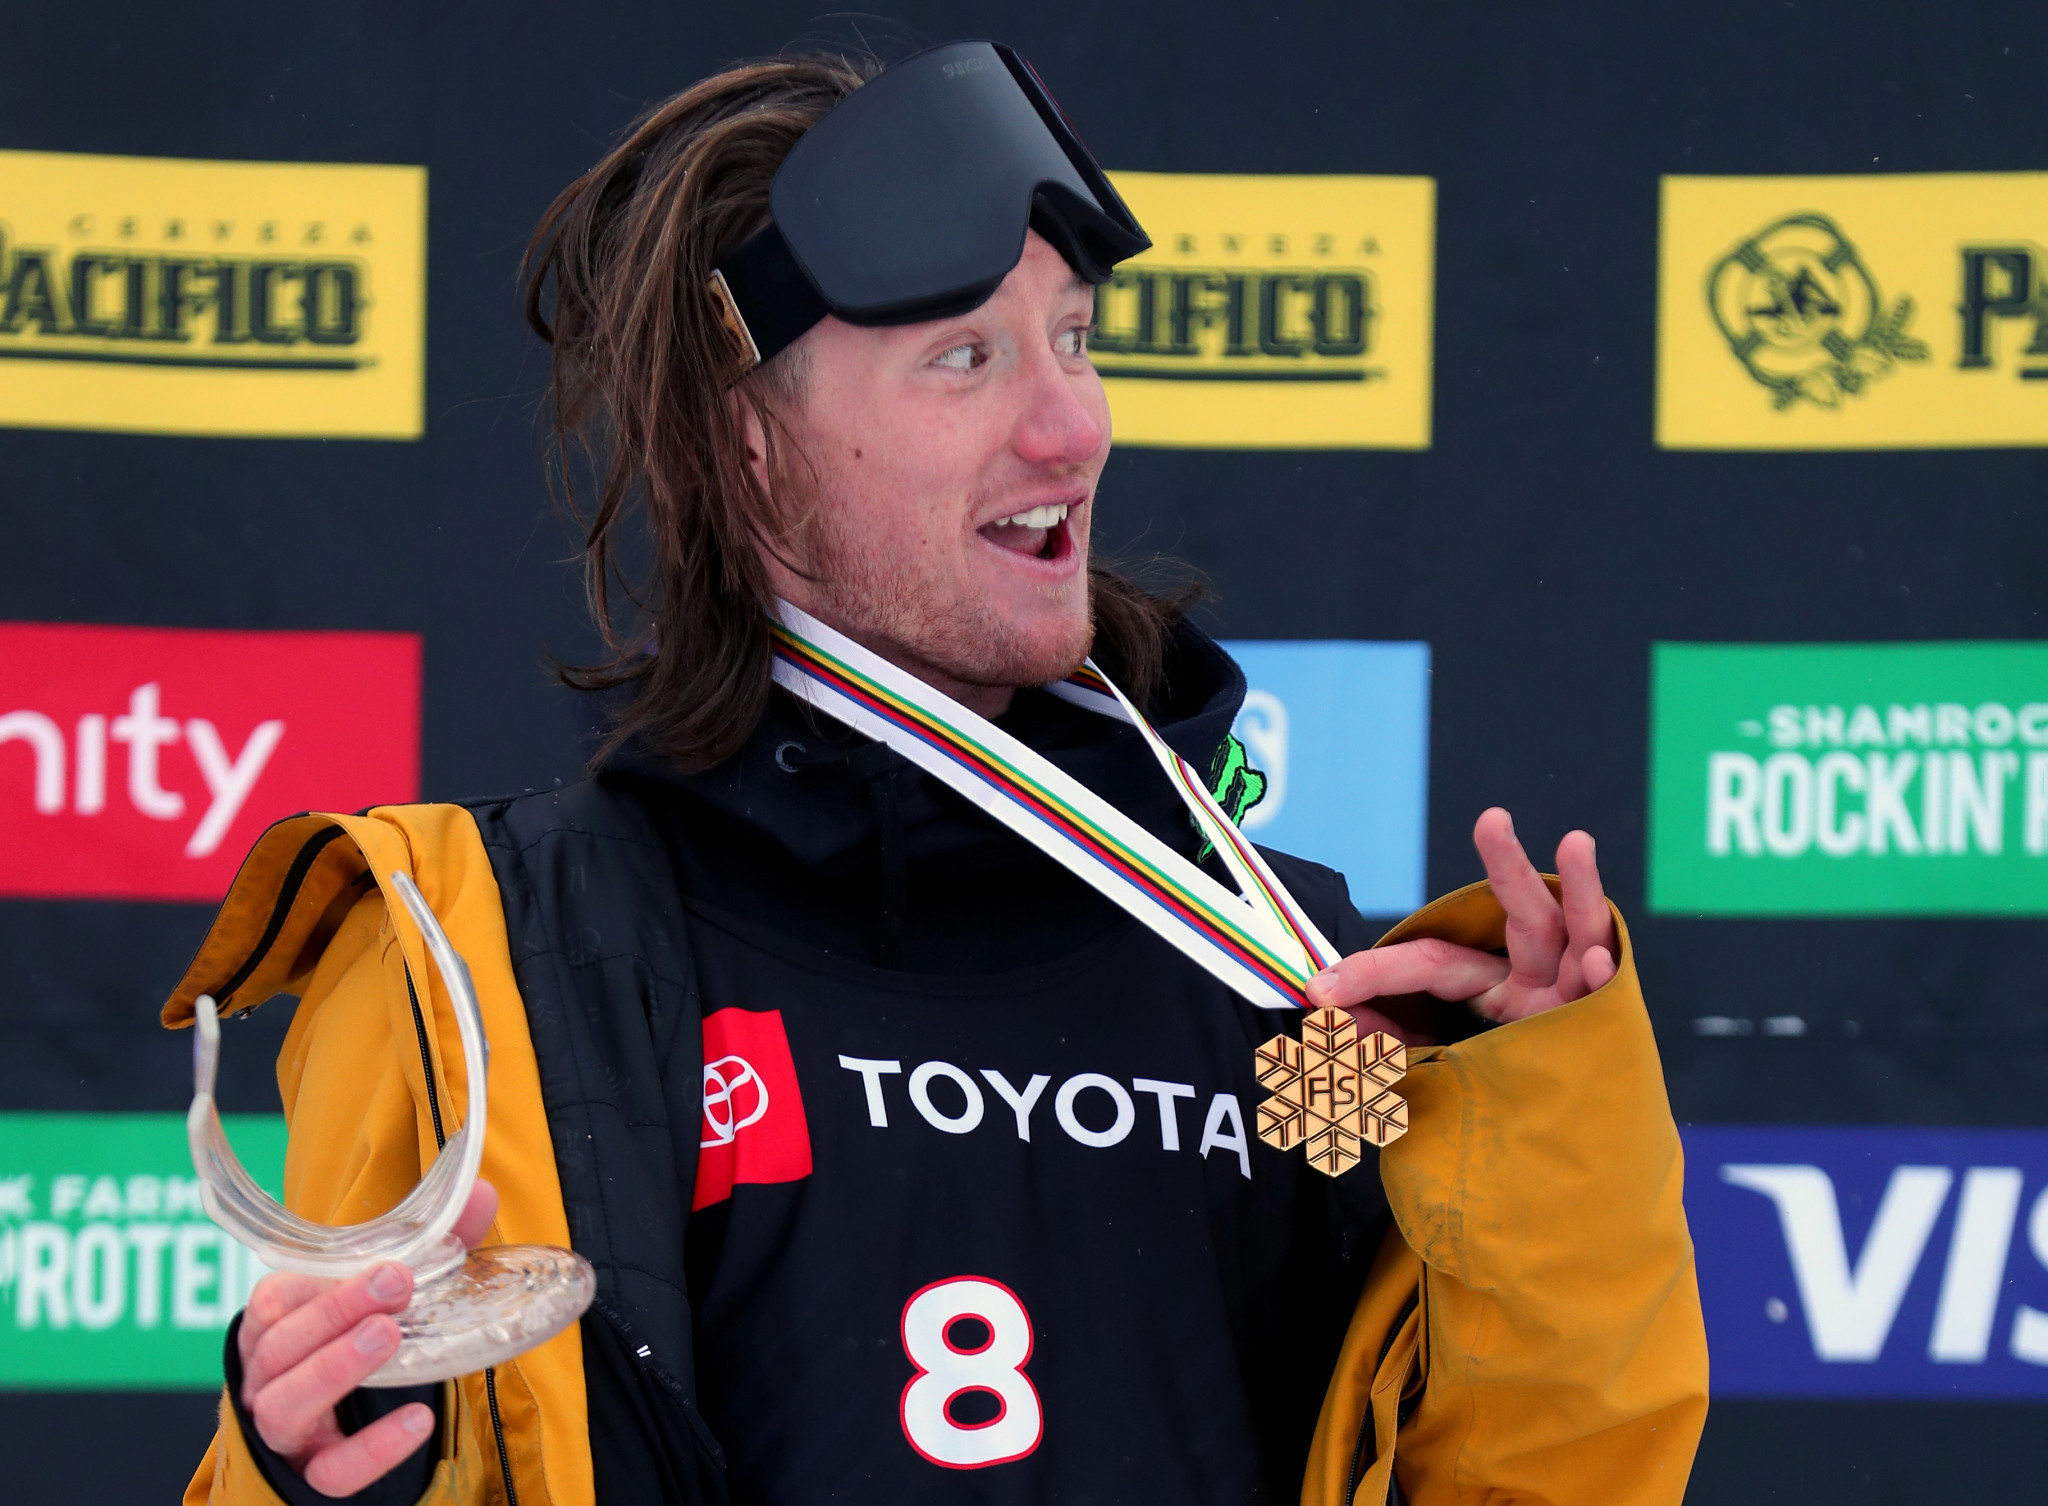 Woods wins slopestyle gold for Britain at Freestyle Ski and Snowboarding World Championships